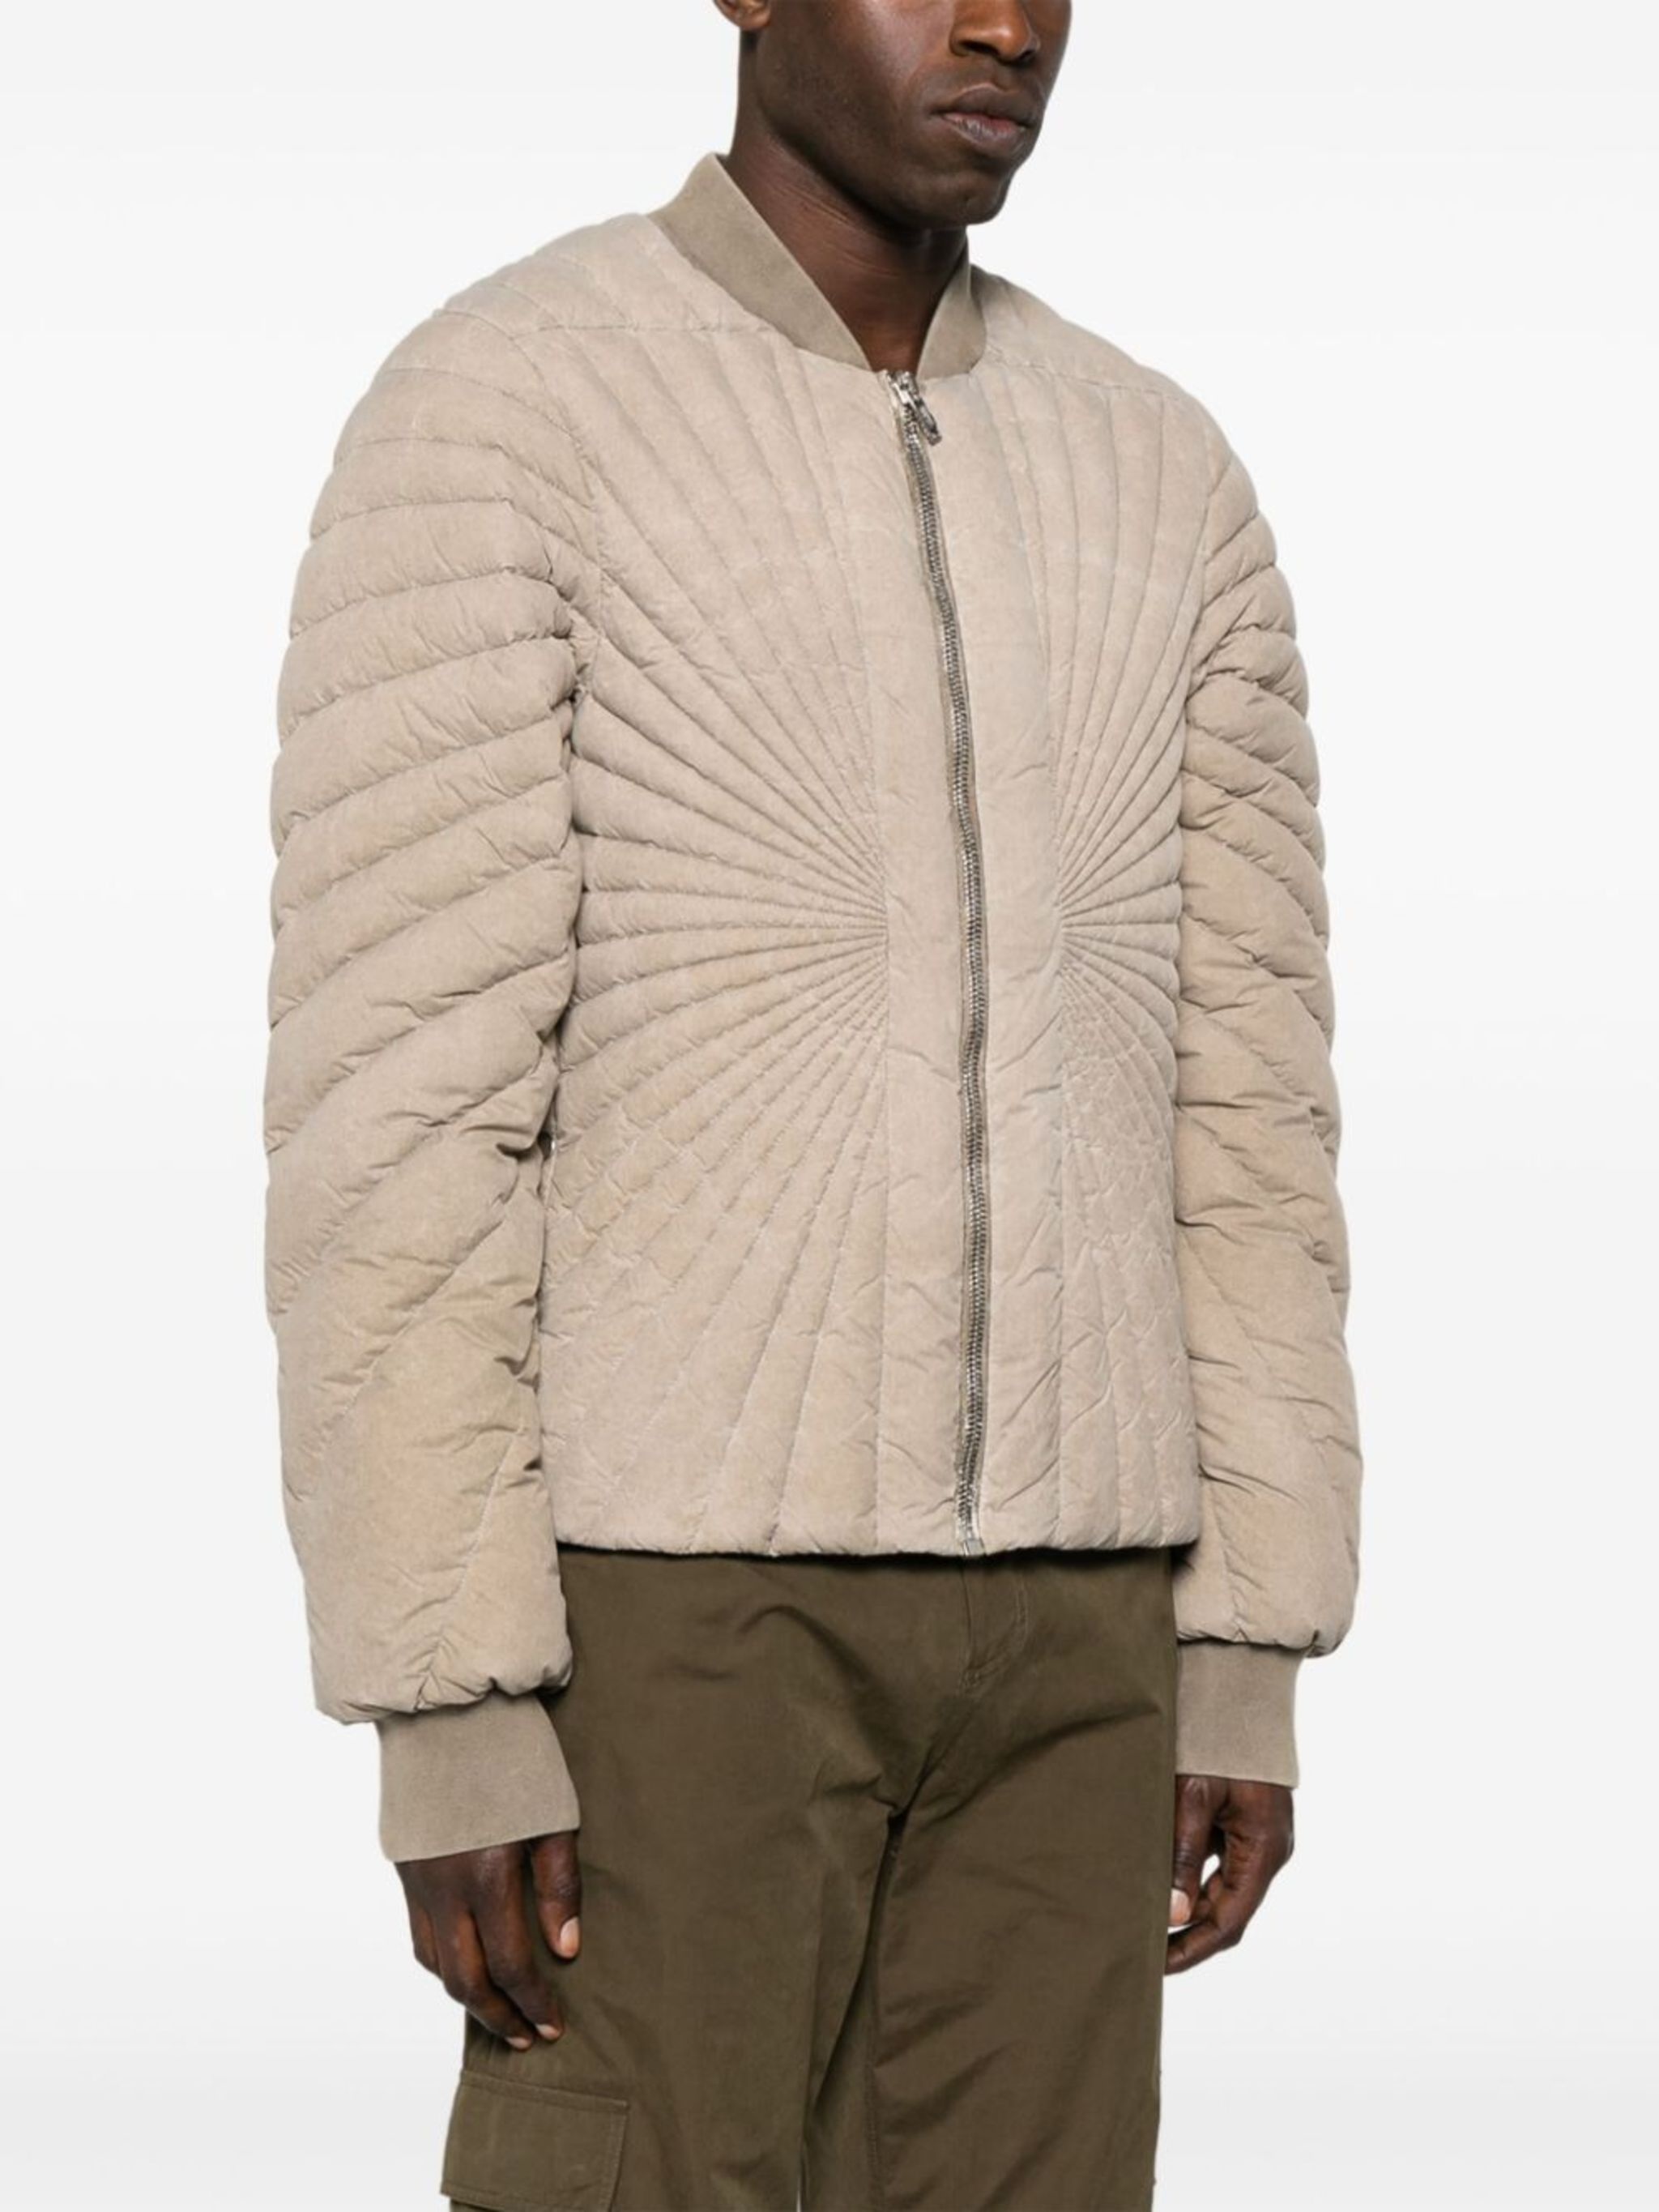 x Rick Owens Radiance Flight quilted bomber jacket - 4